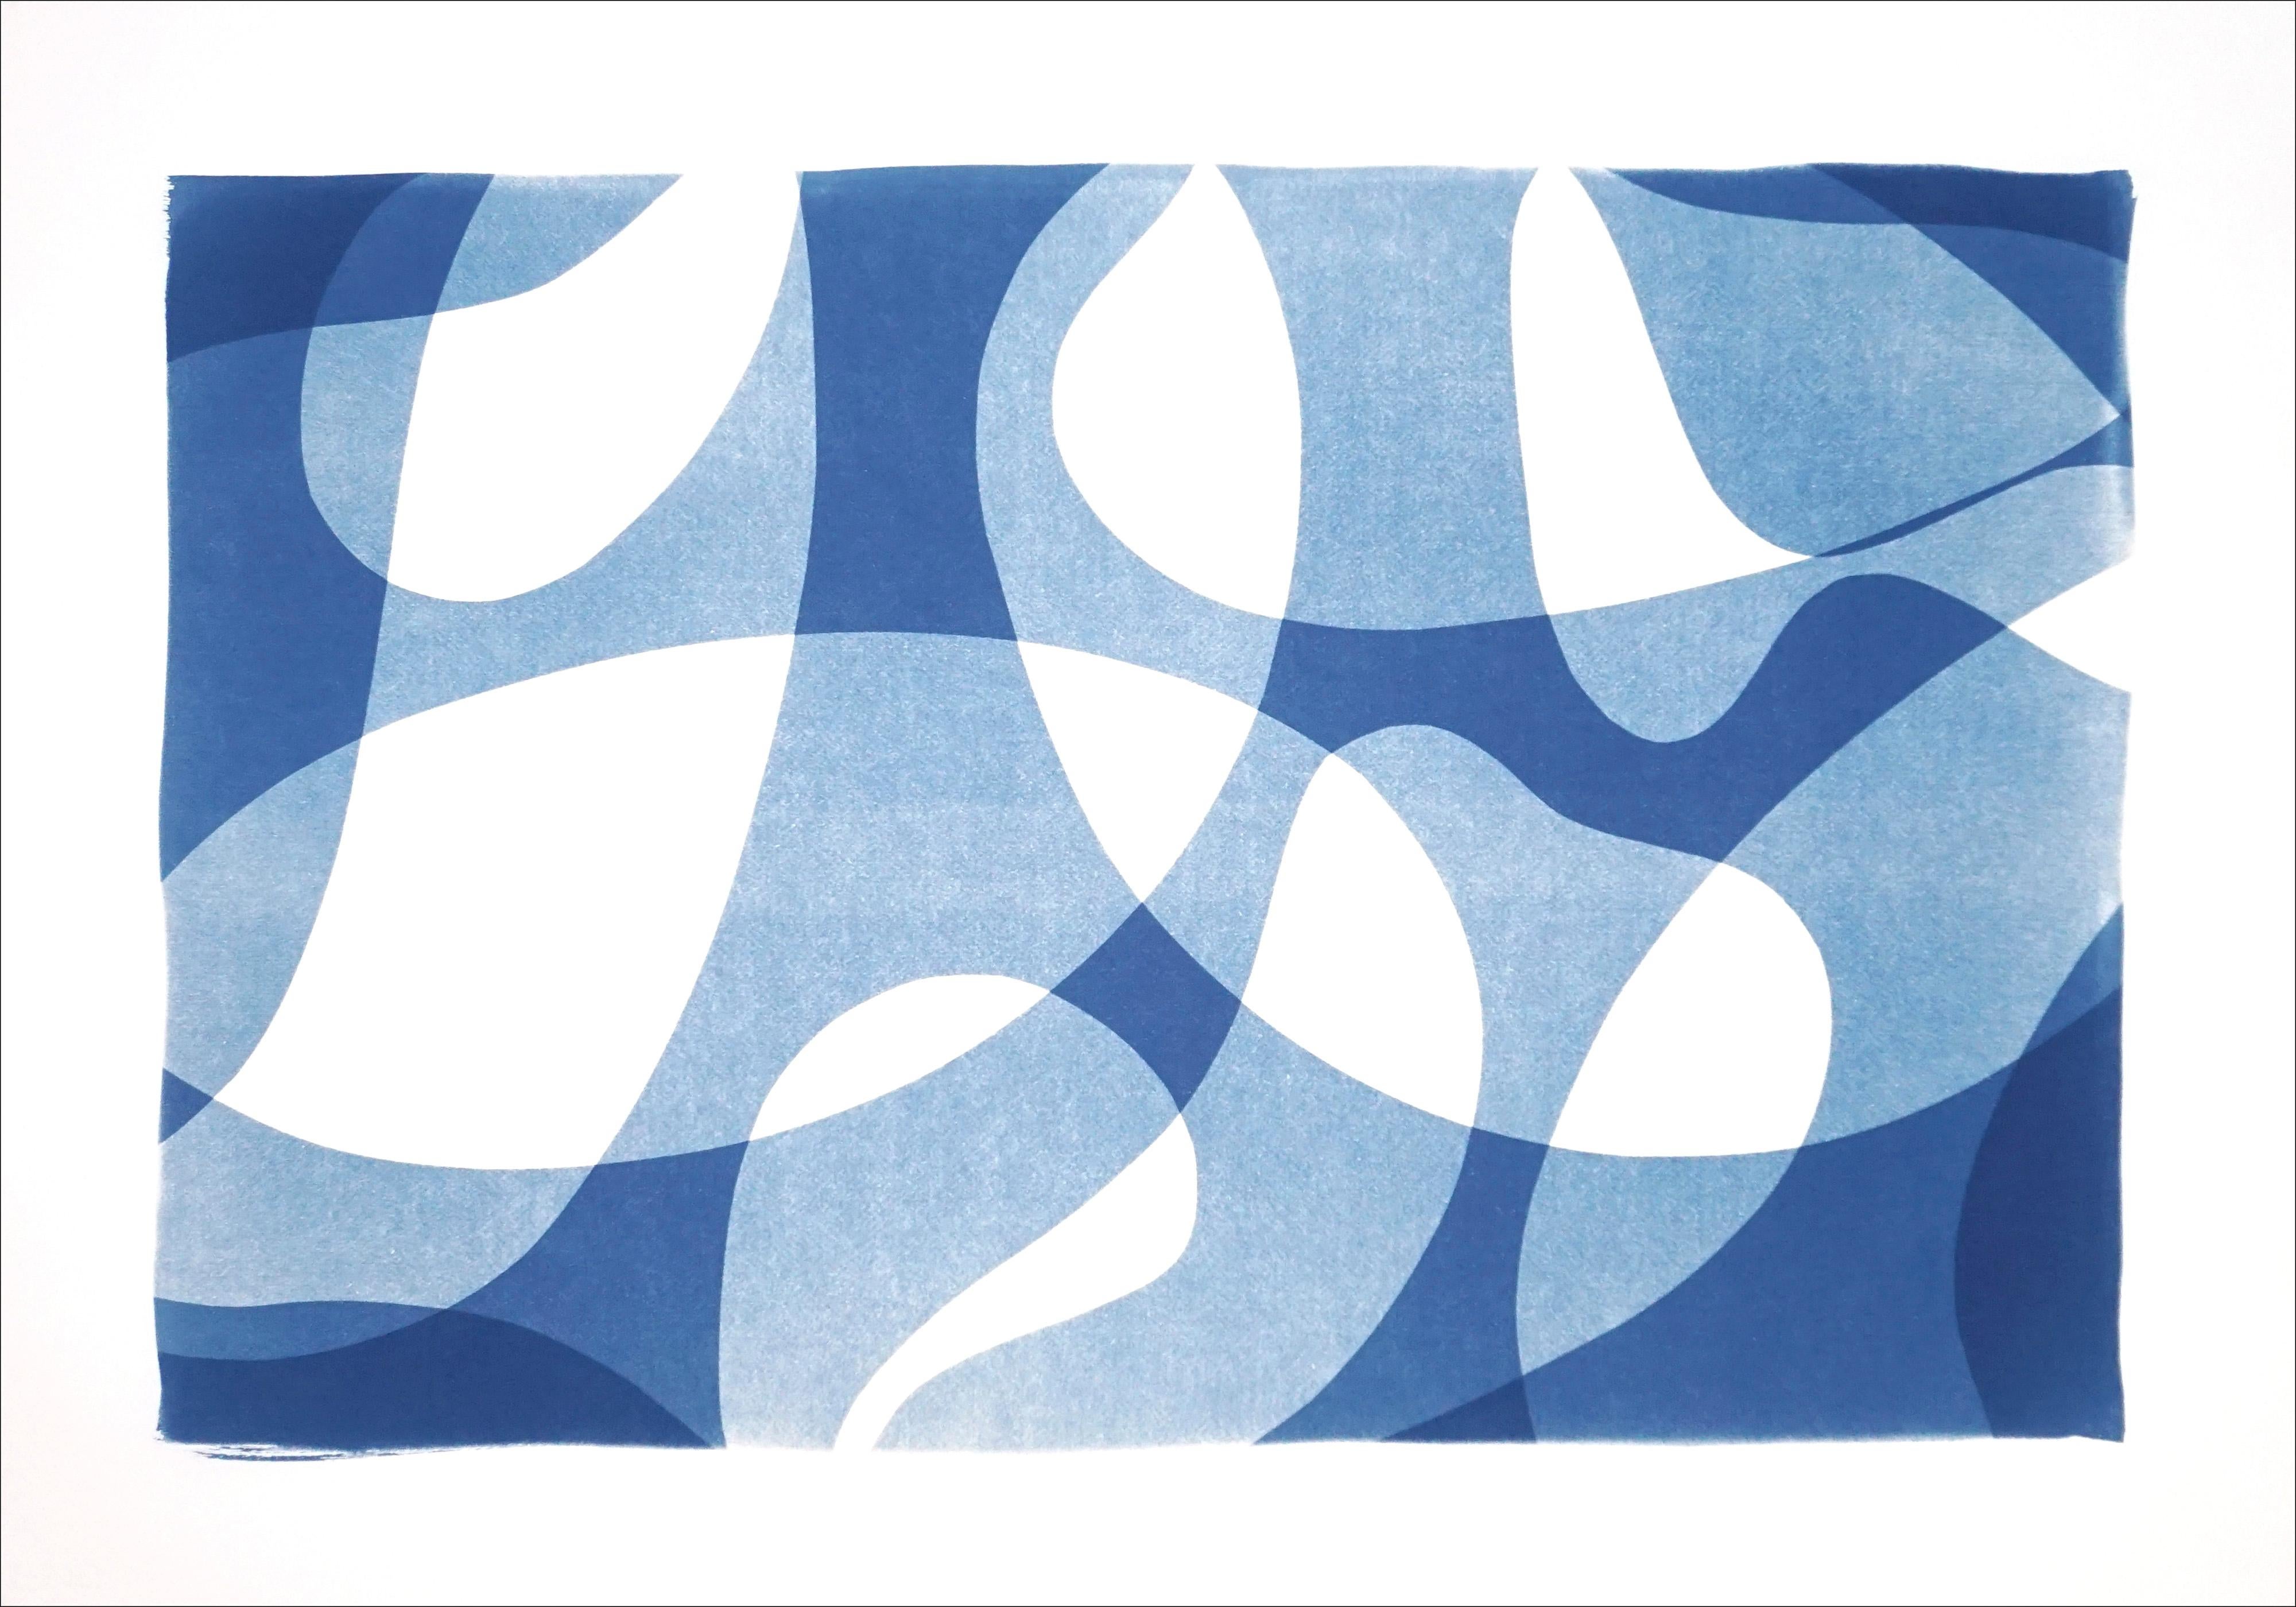 Contour Silhouettes in Blue, Modern Print of Organic Shapes in Blue Tones, White